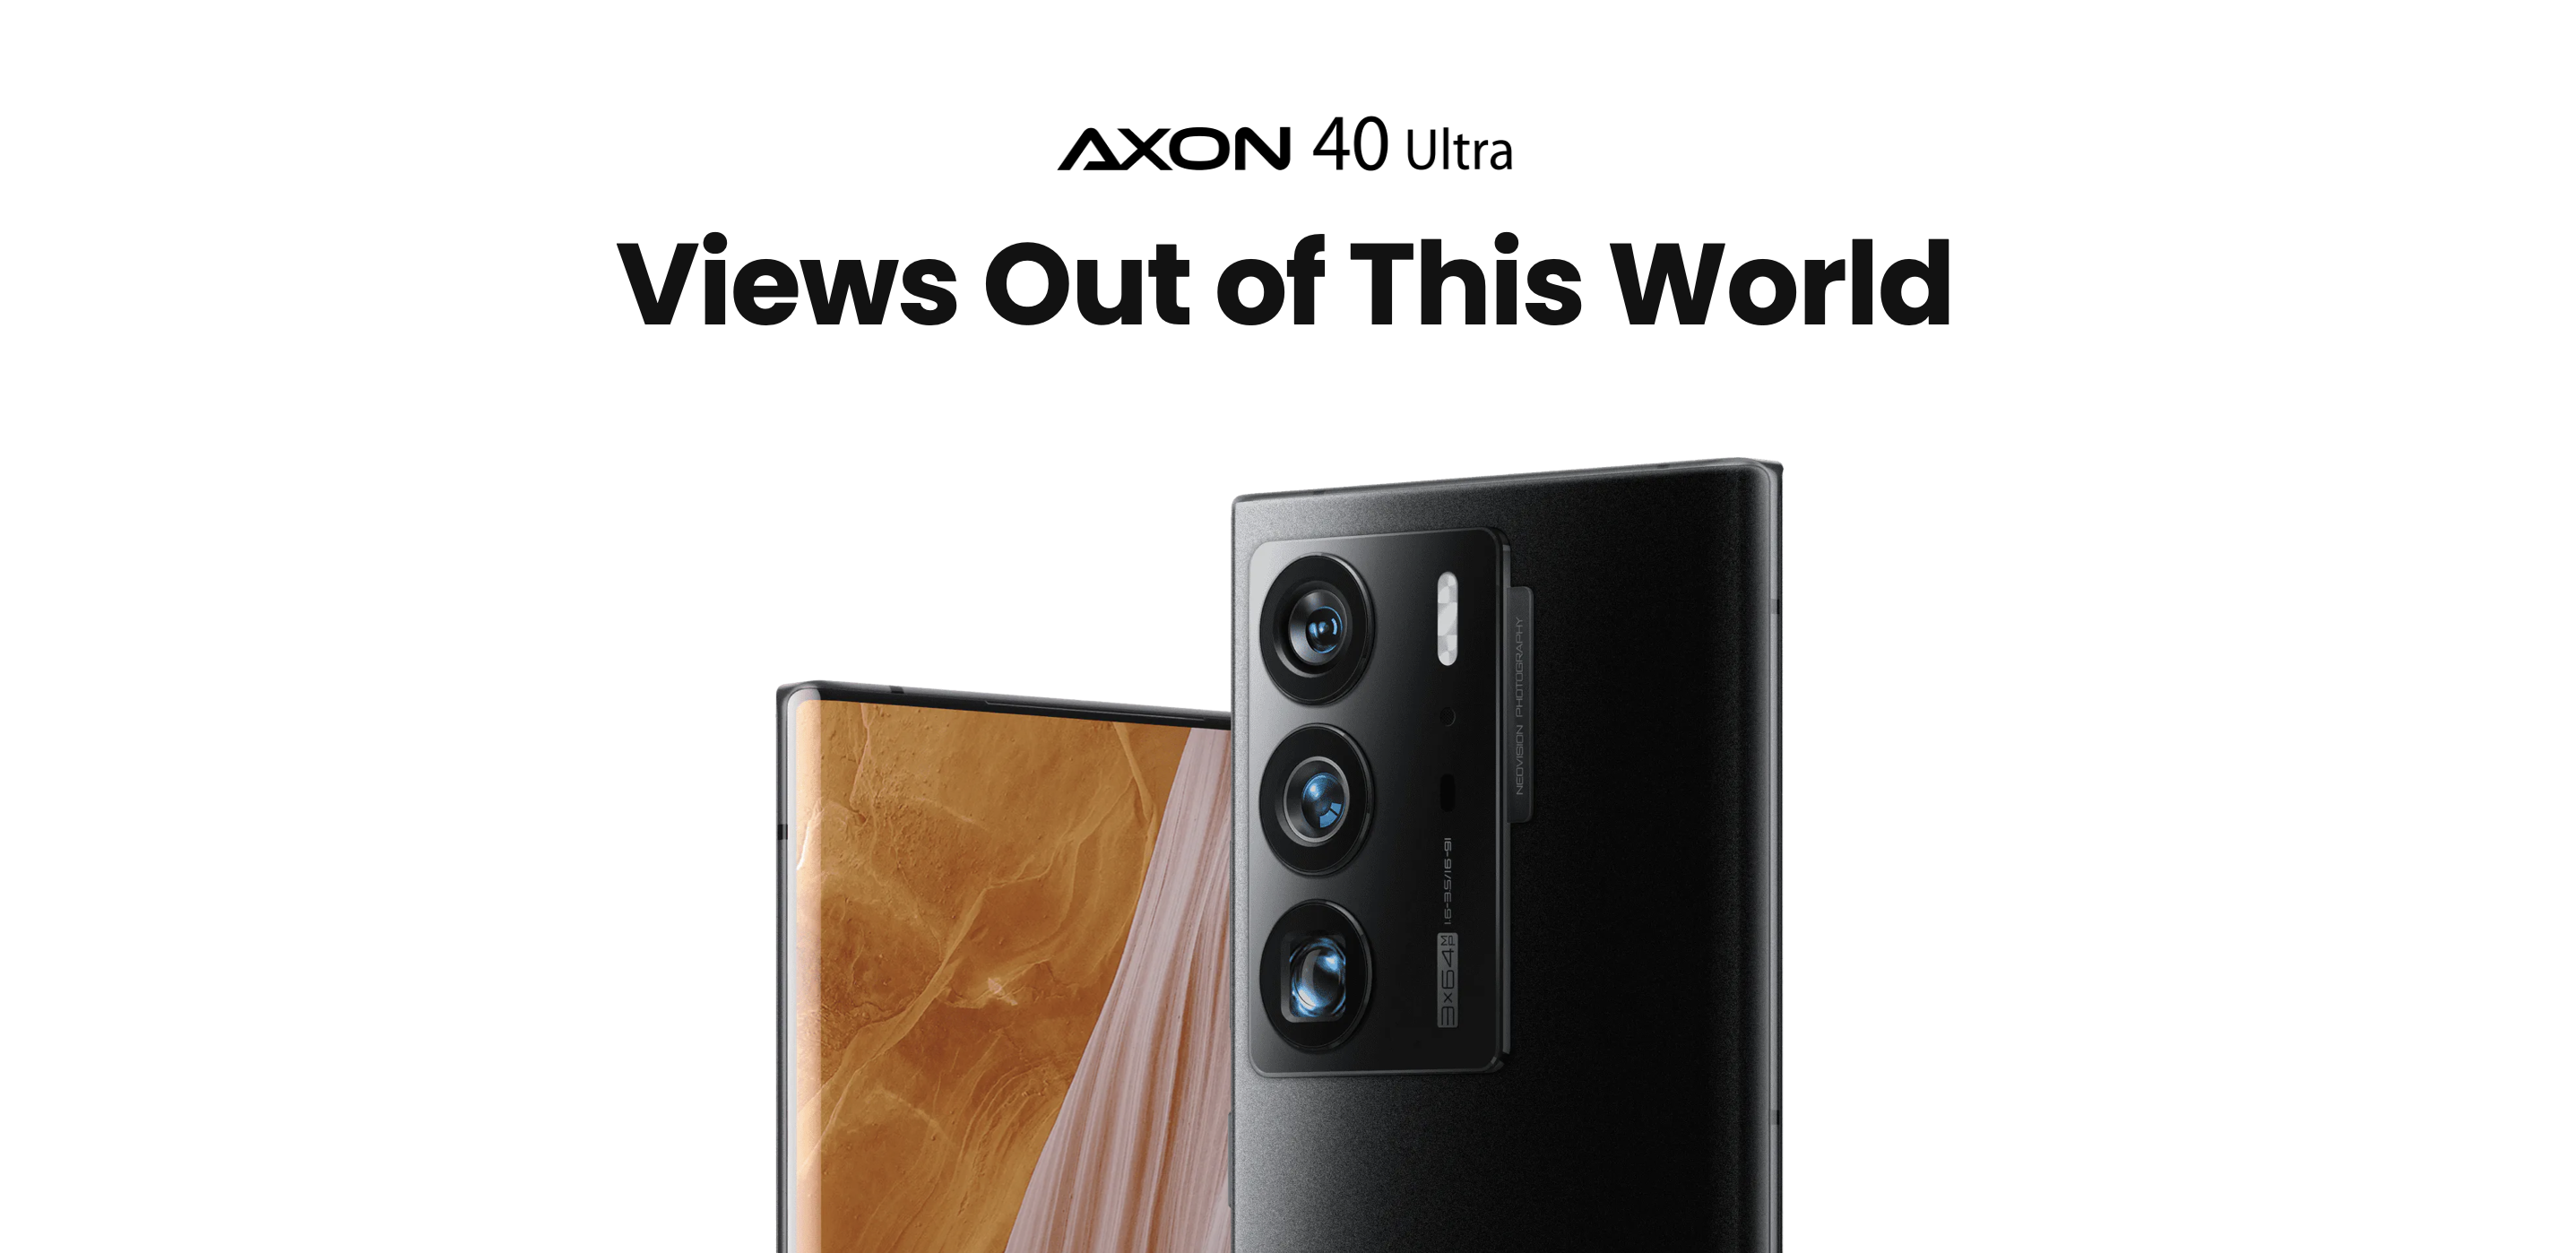 ZTE Axon 40 Ultra with Snapdragon 8 Gen 1 chip, under-screen camera and 120Hz display launched globally